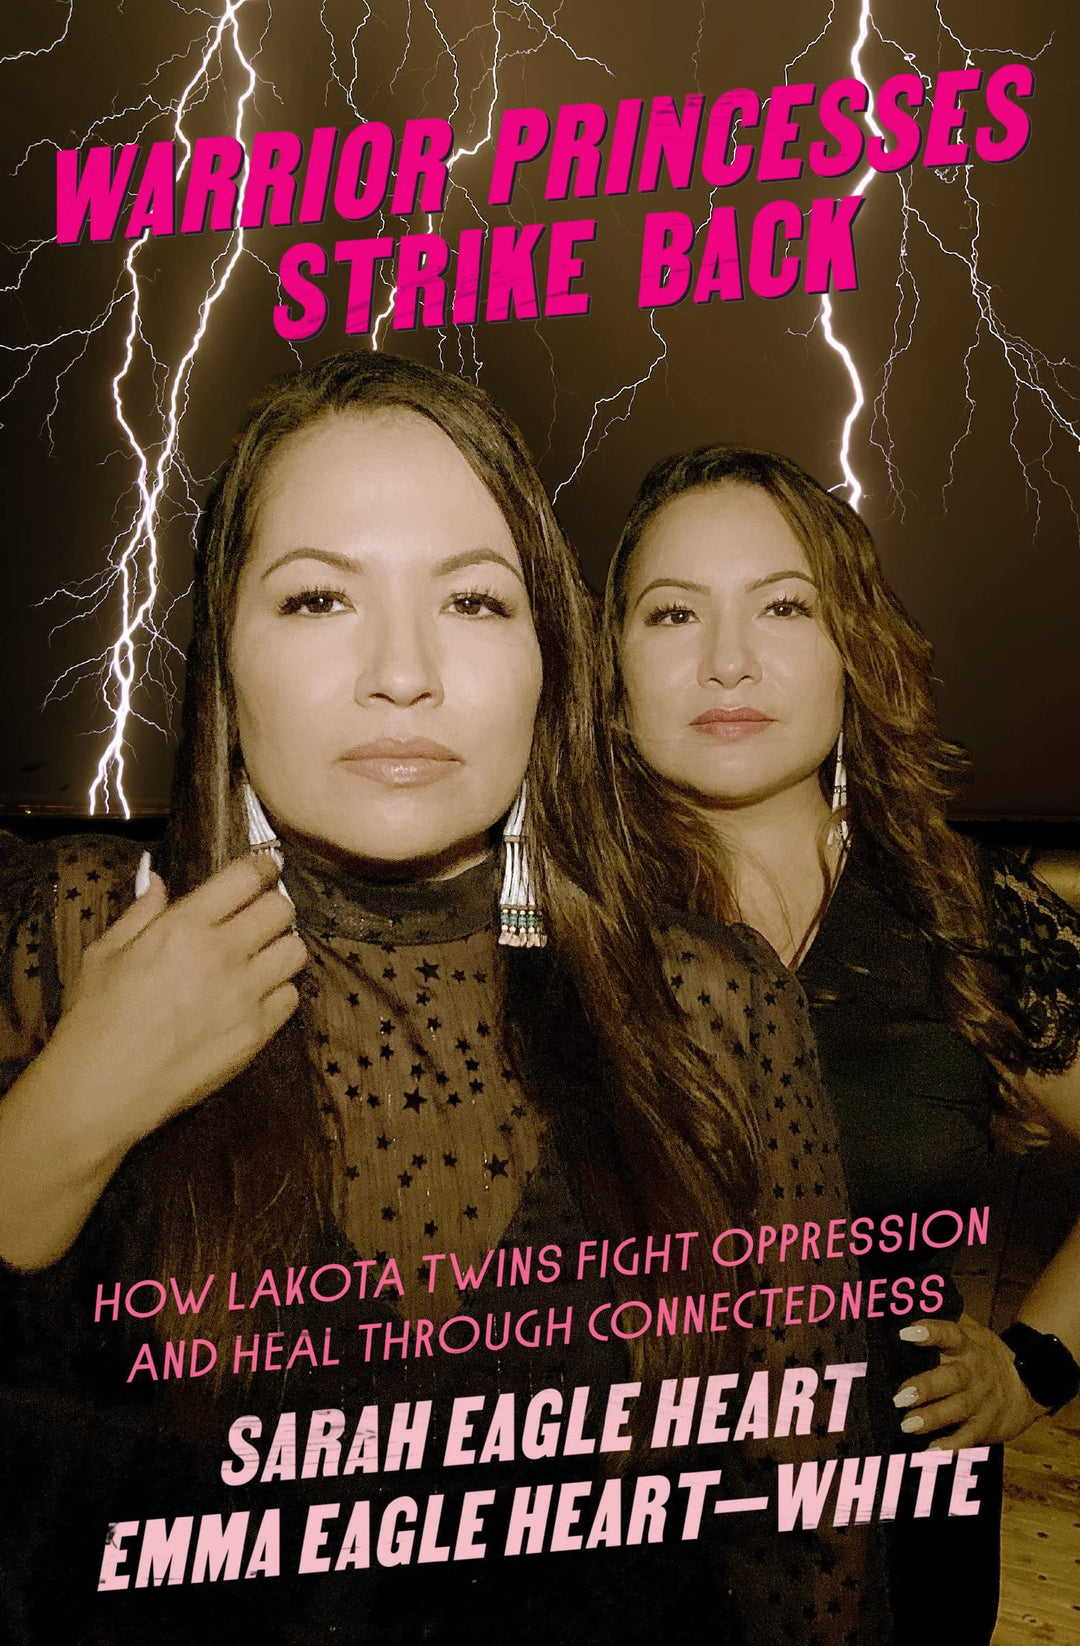 Warrior Princesses Strike Back: How Lakota Twins Fight Oppression and Heal Through Connectedness by Sarah Eagle Heart & Emma Eagle Heart-White